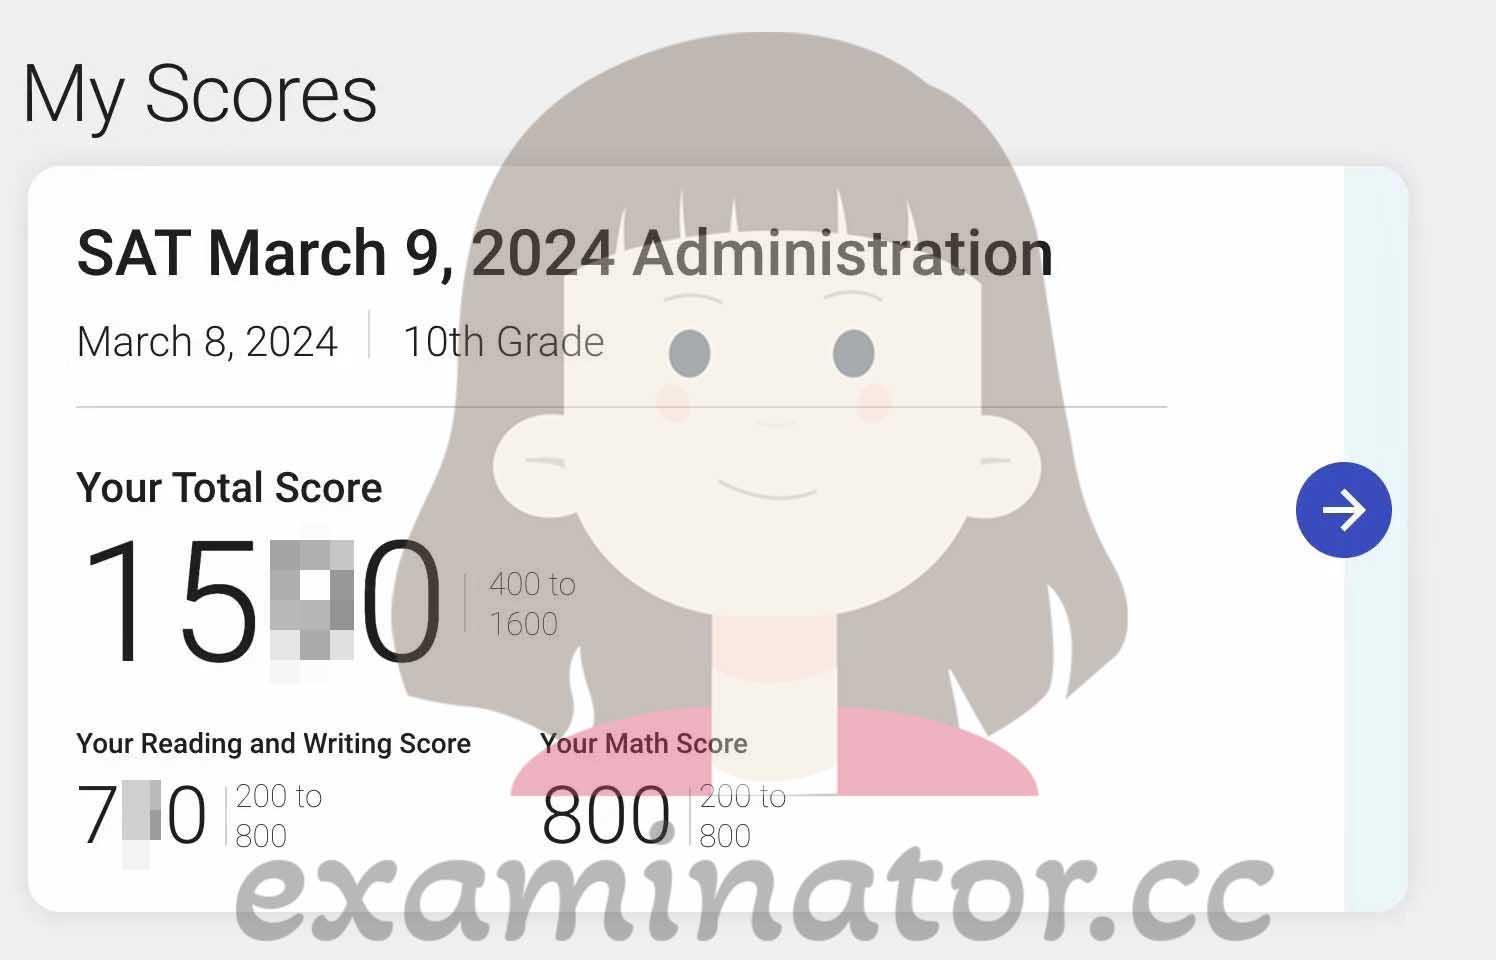 Almost Perfect! 🎉 Score a 1500+ on the Digital SAT in March 2024 with Our SAT Cheating Services! 💯